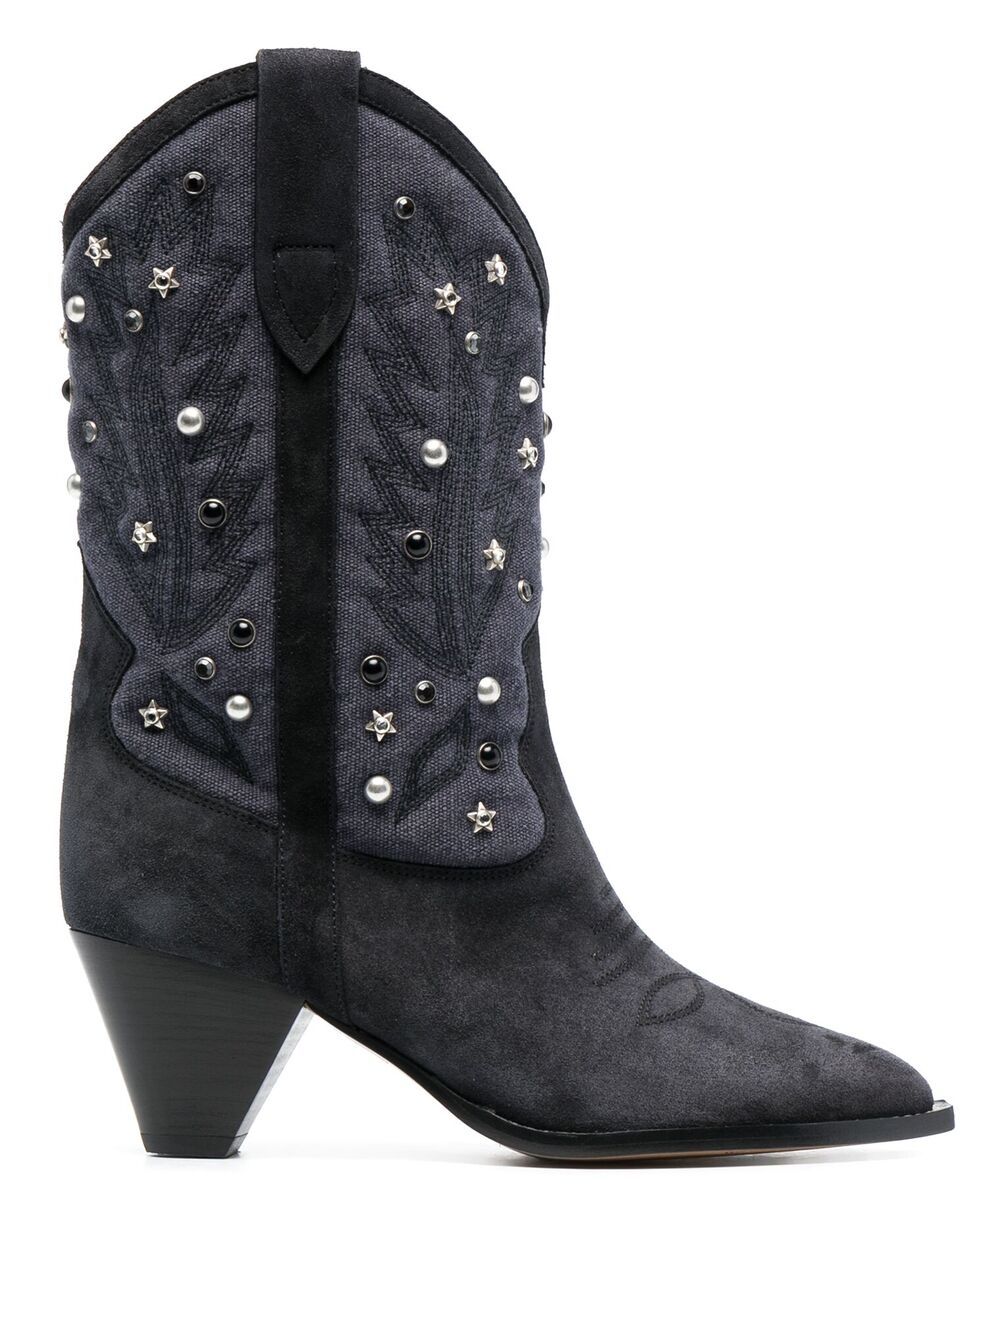 ISABEL MARANT STUDDED SUEDE BOOTS